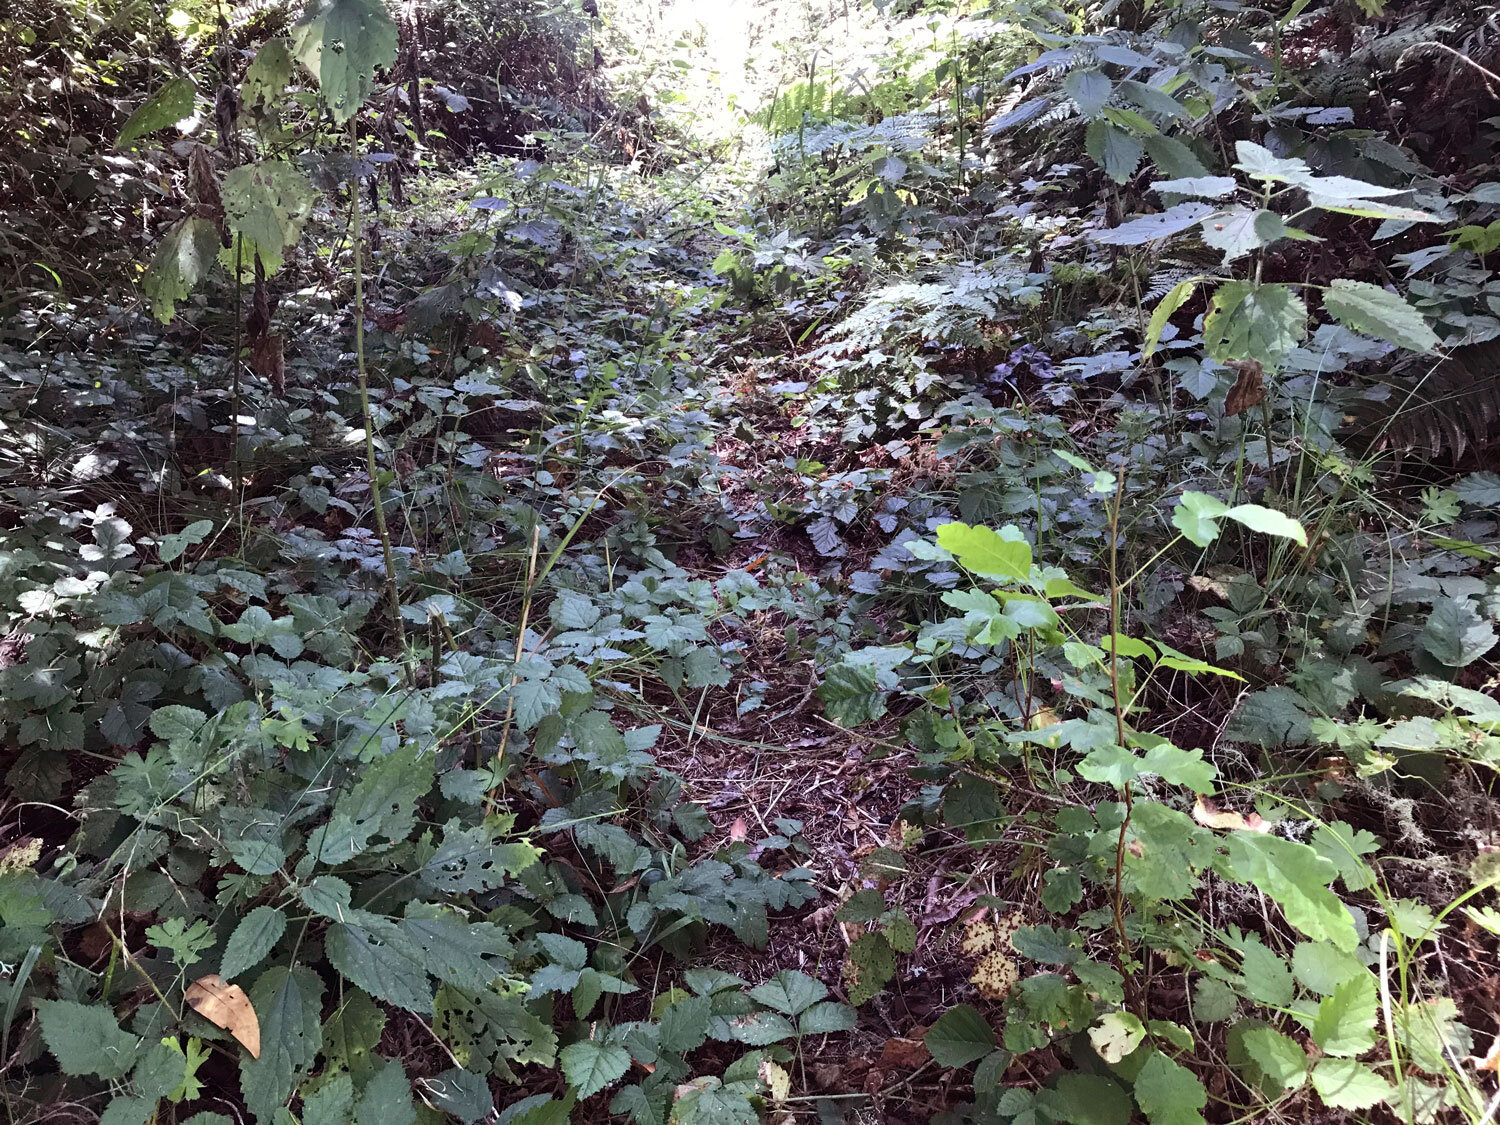 stinging nettle and poison oak line the trail